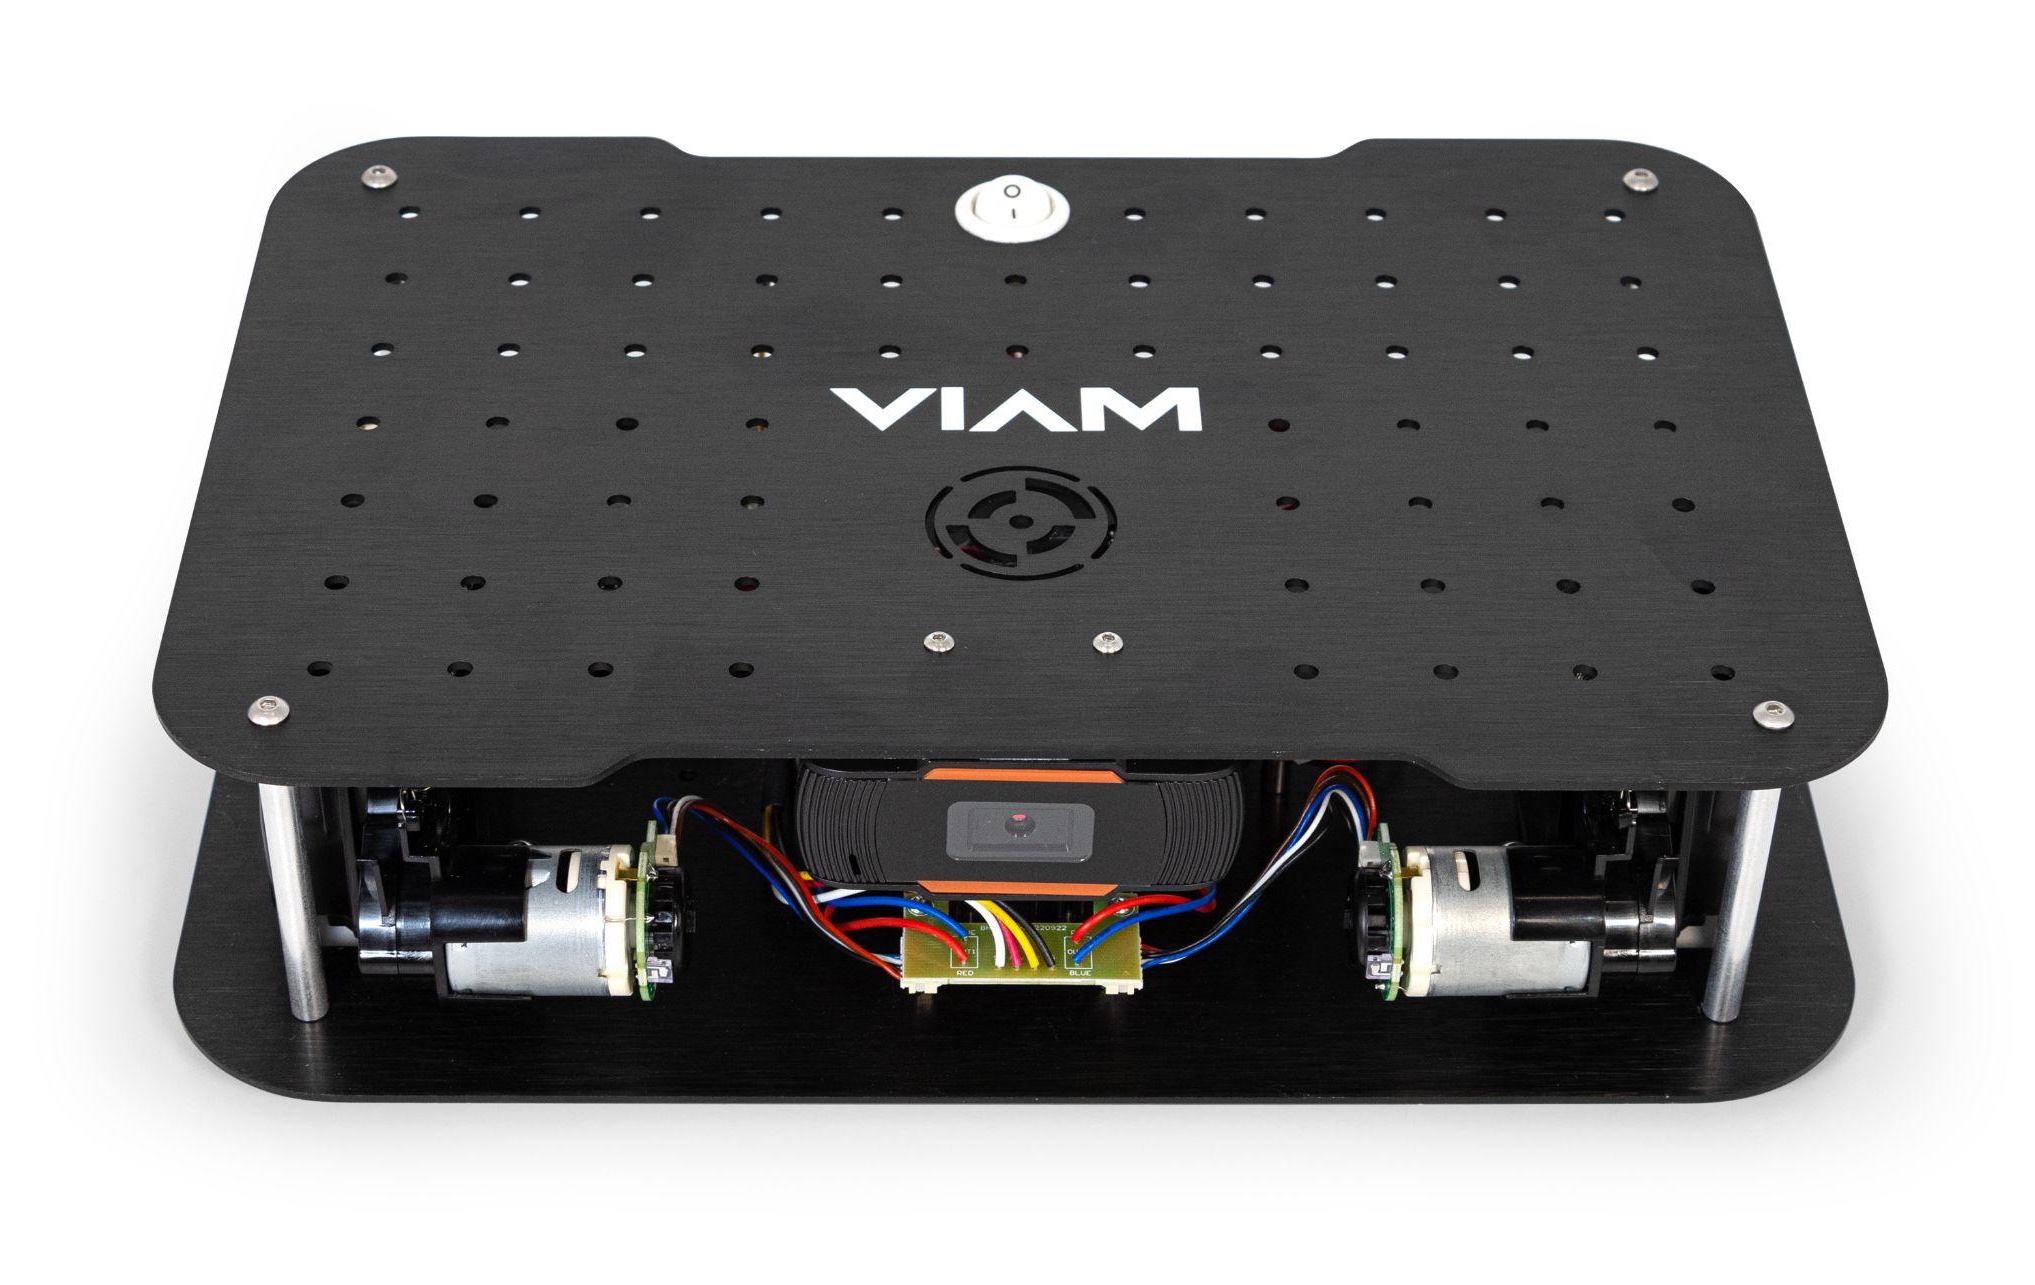 The front of the assembled Viam Rover